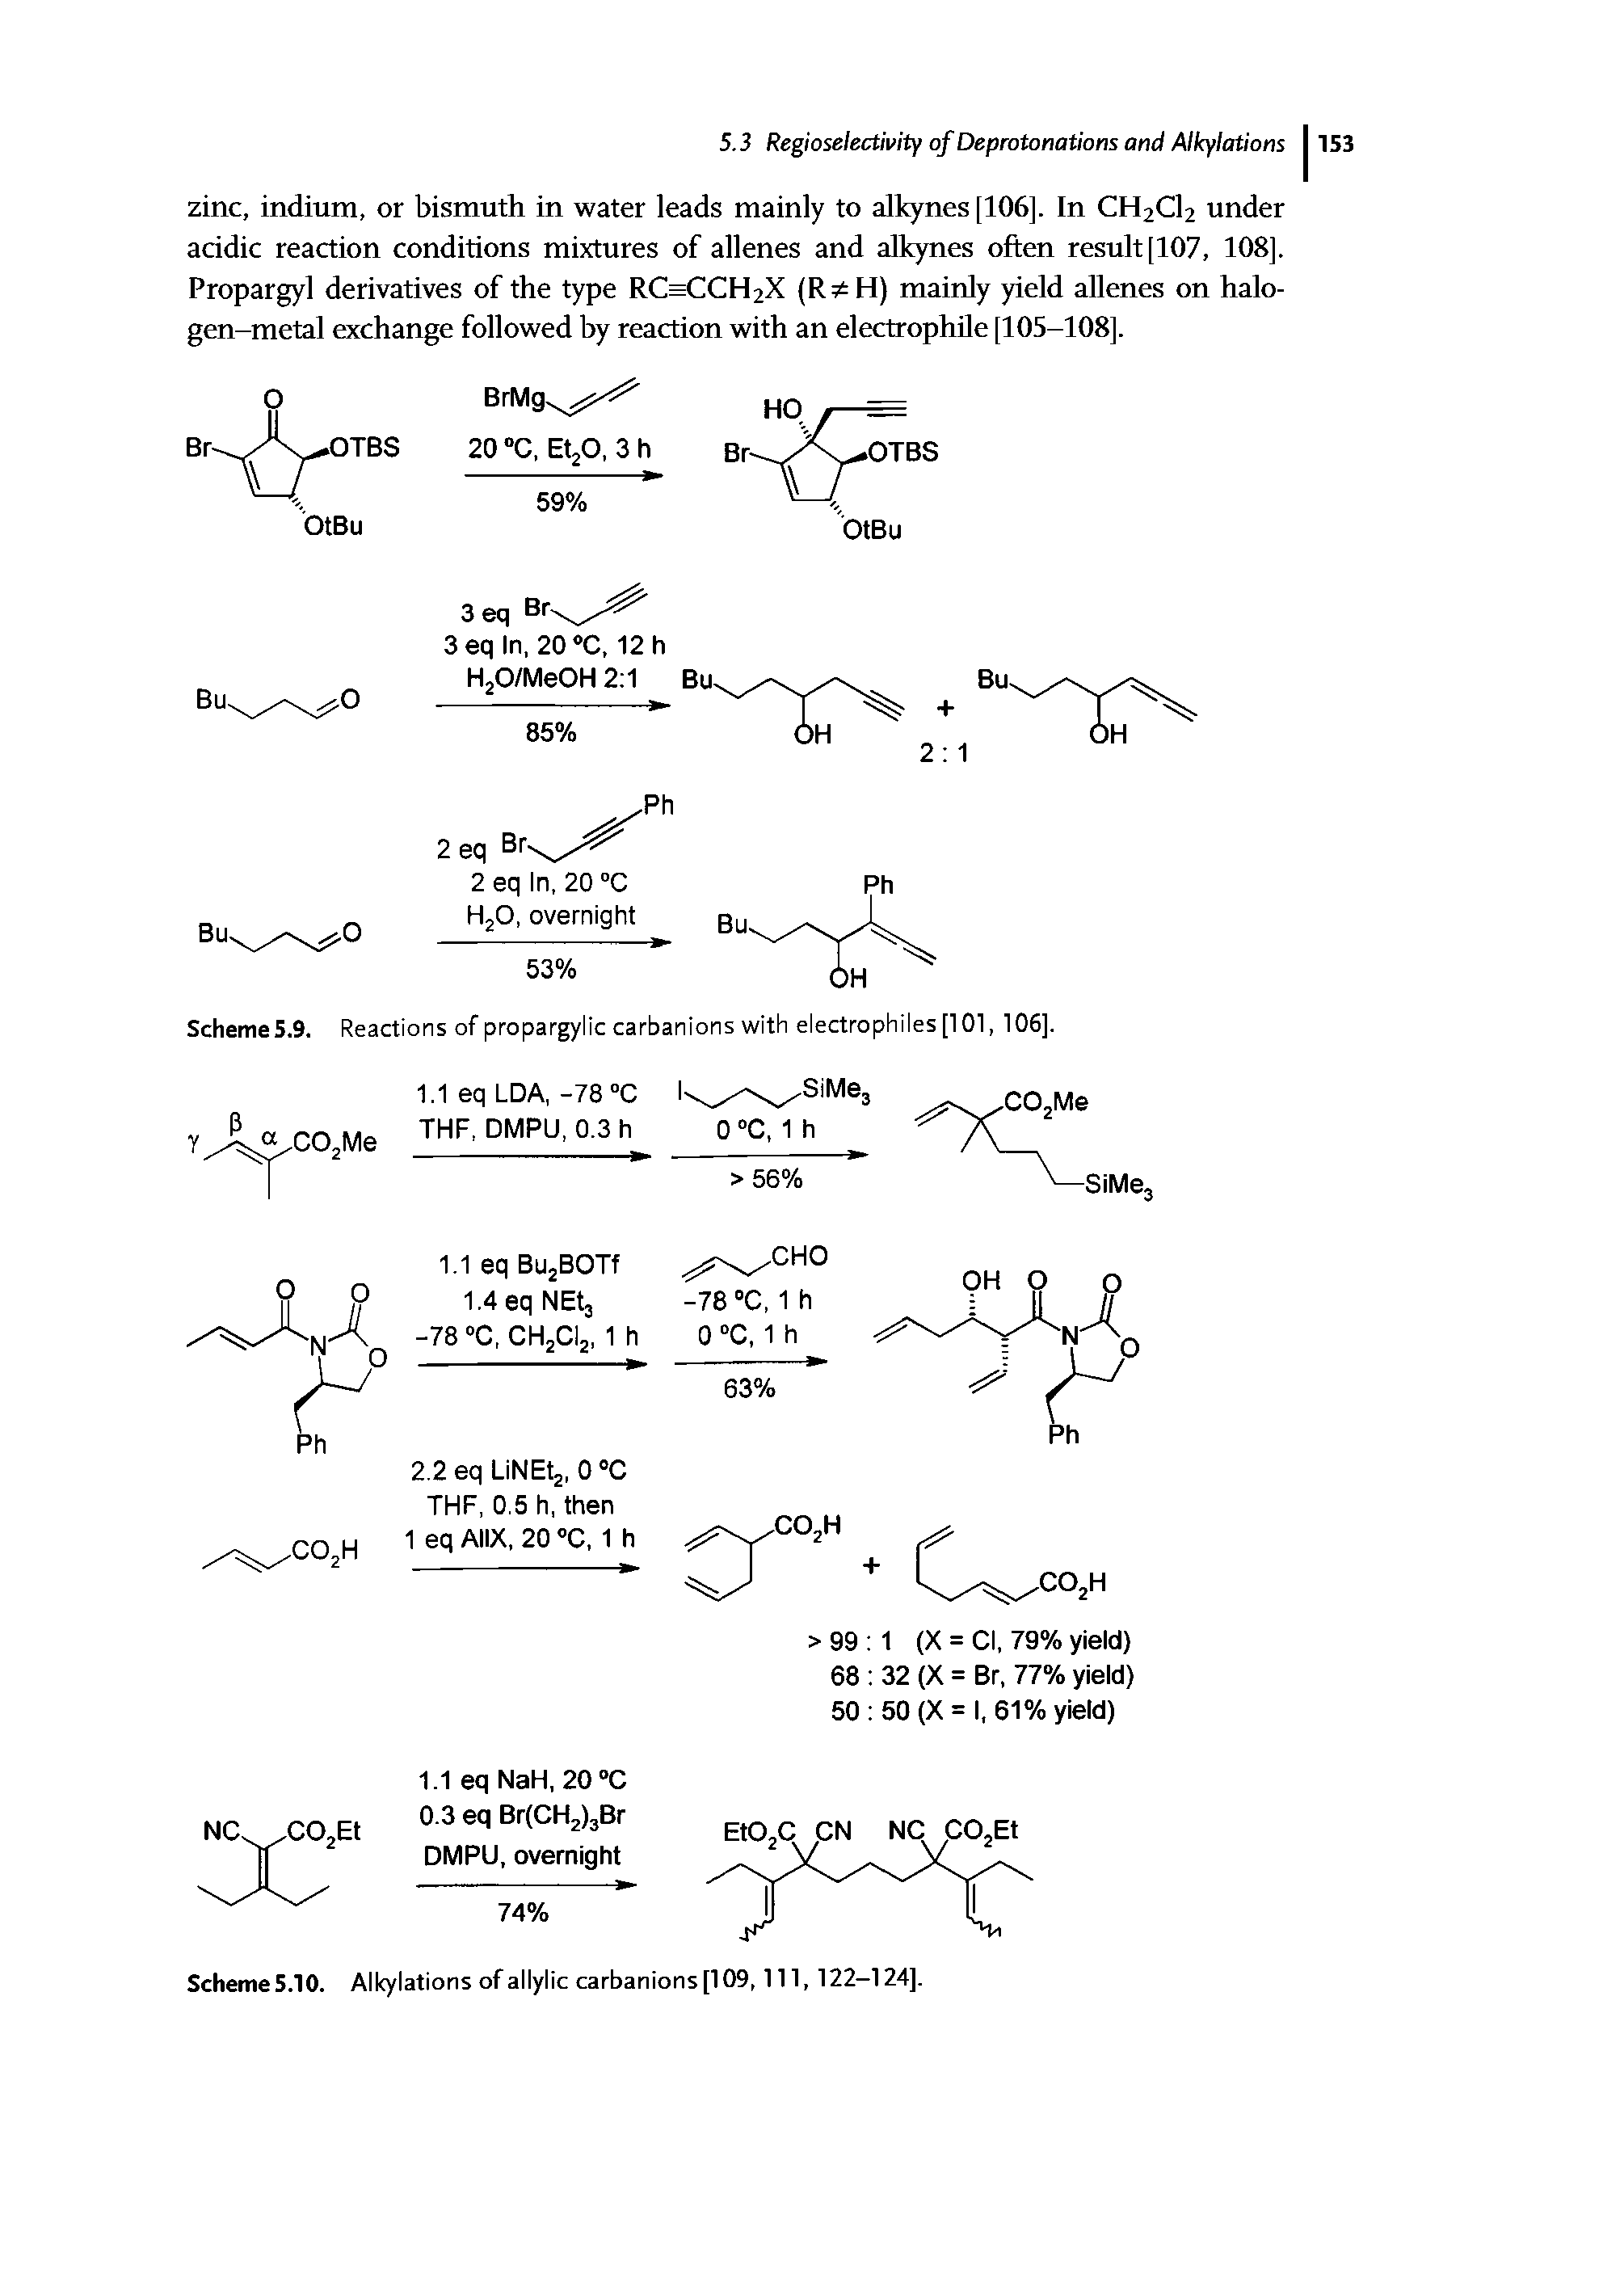 Scheme5.9. Reactions of propargylic carbanions with electrophiles [101, 106].